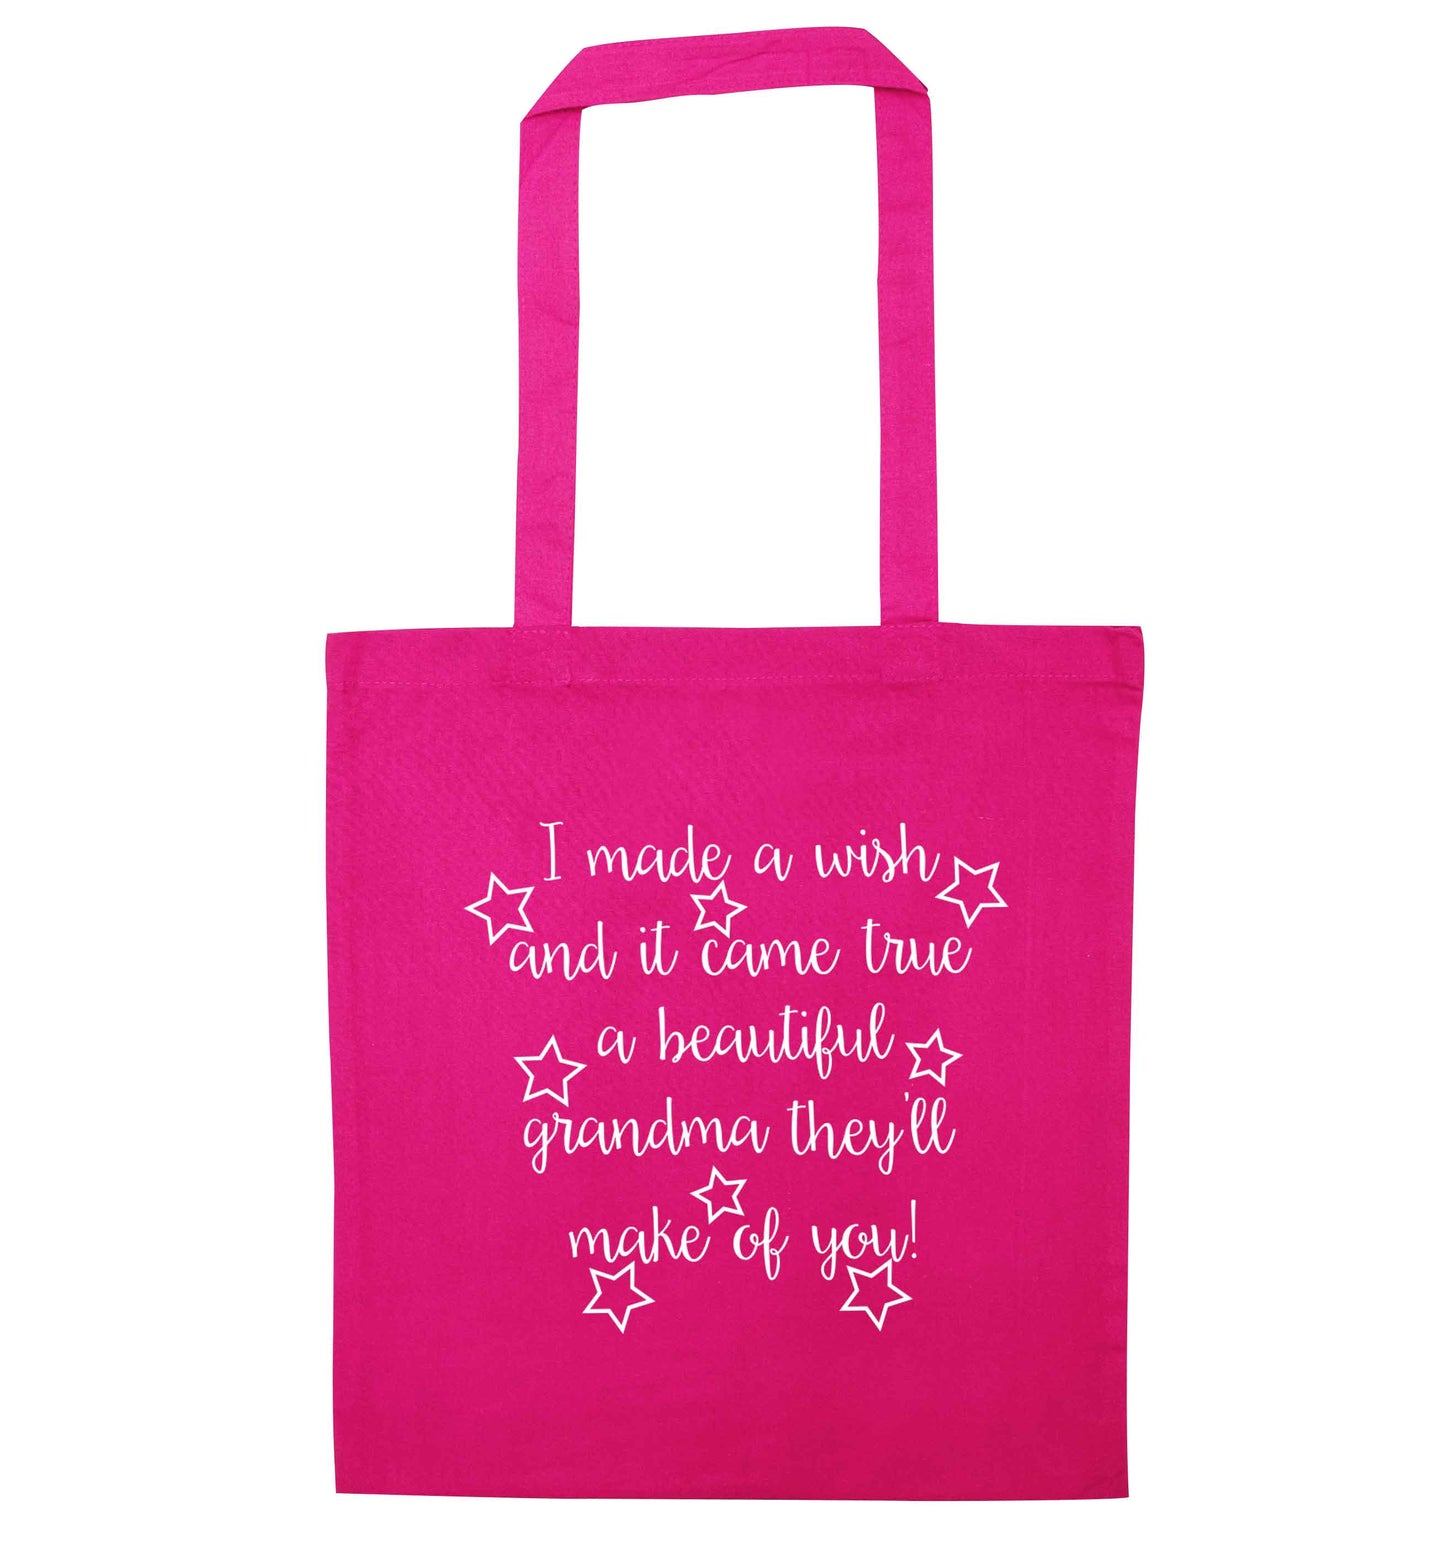 I made a wish and it came true a beautiful grandma they'll make of you! pink tote bag